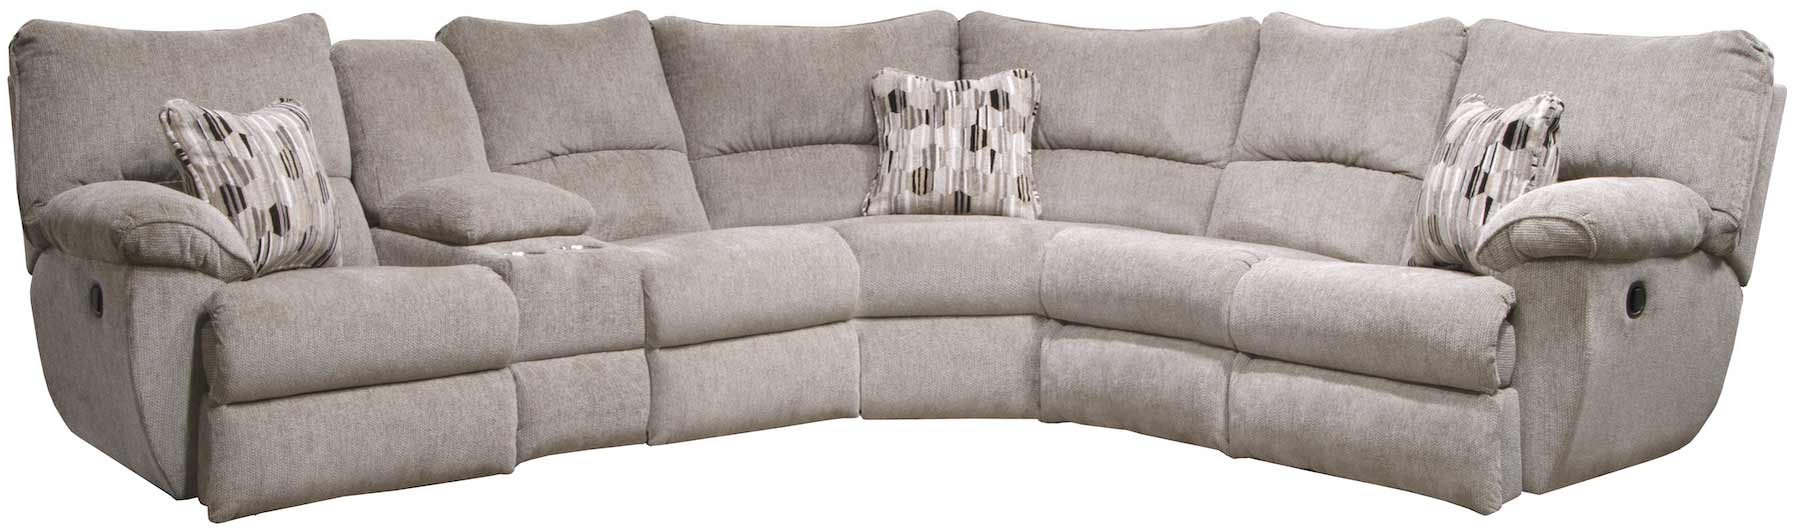 Lay-Flat Sectional